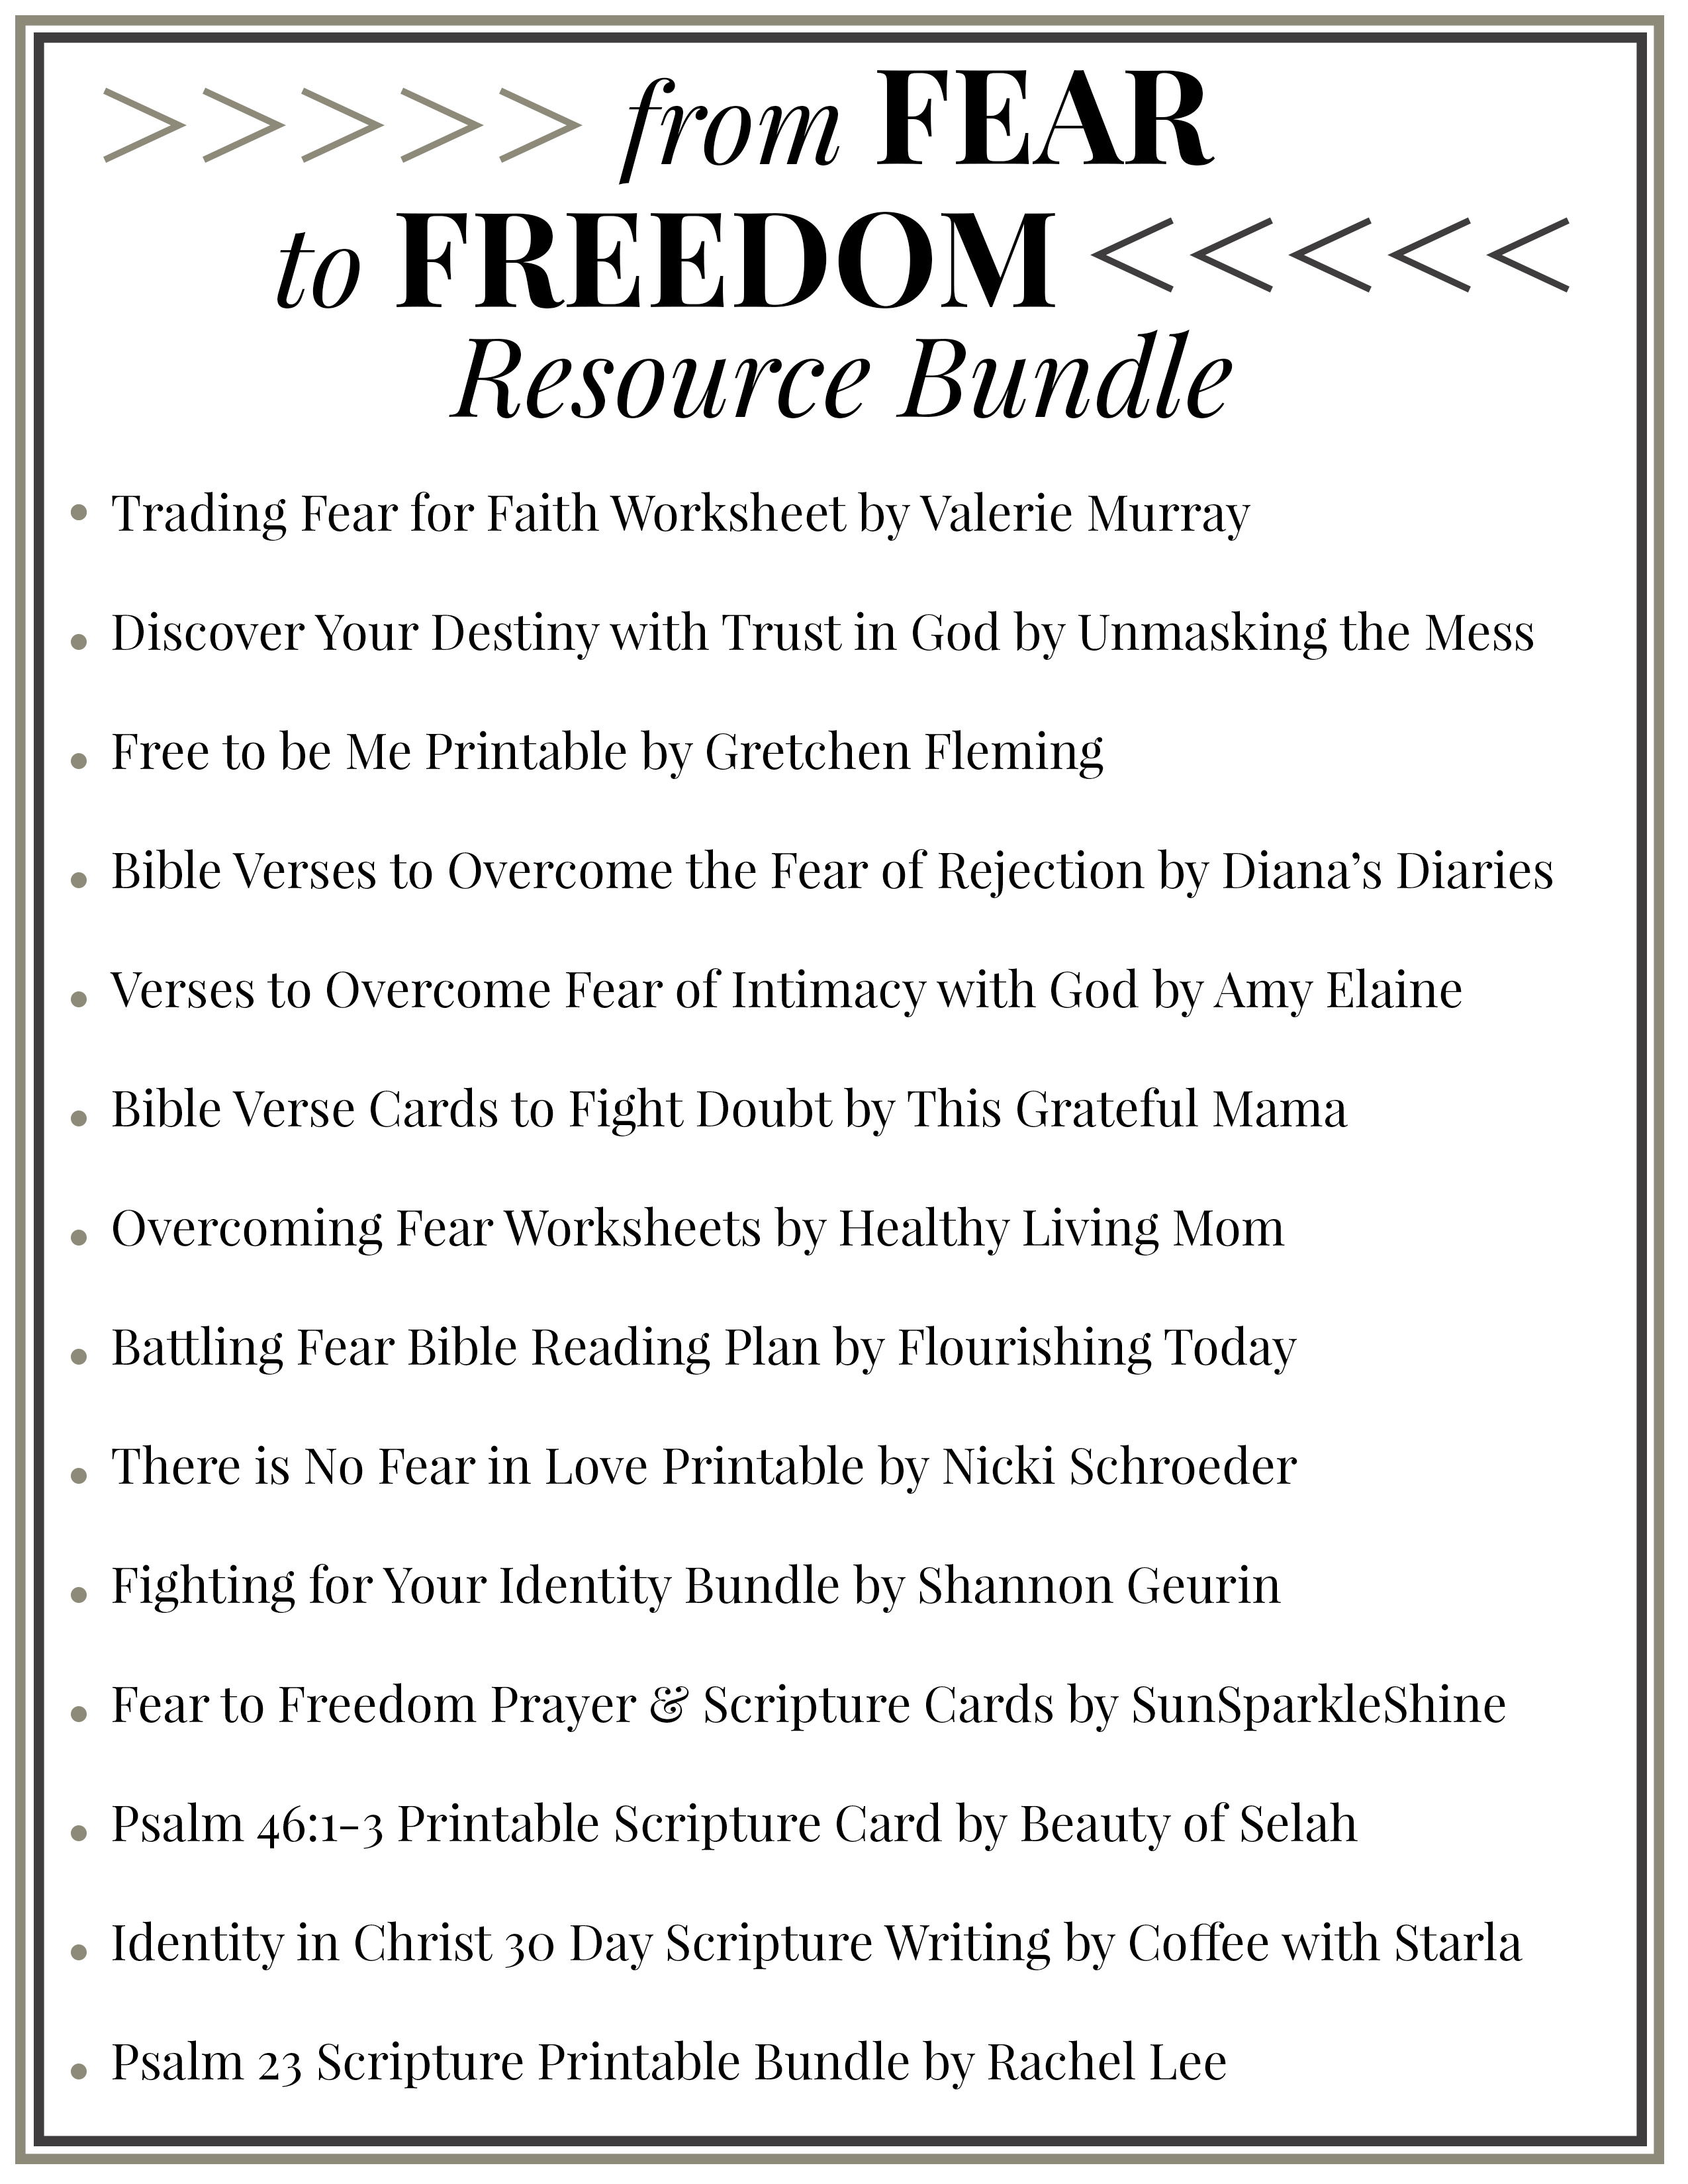 Get the From Fear to Freedom resource bundle - 30+ pages of encouraging content from 14 Christian bloggers -- all FREE!